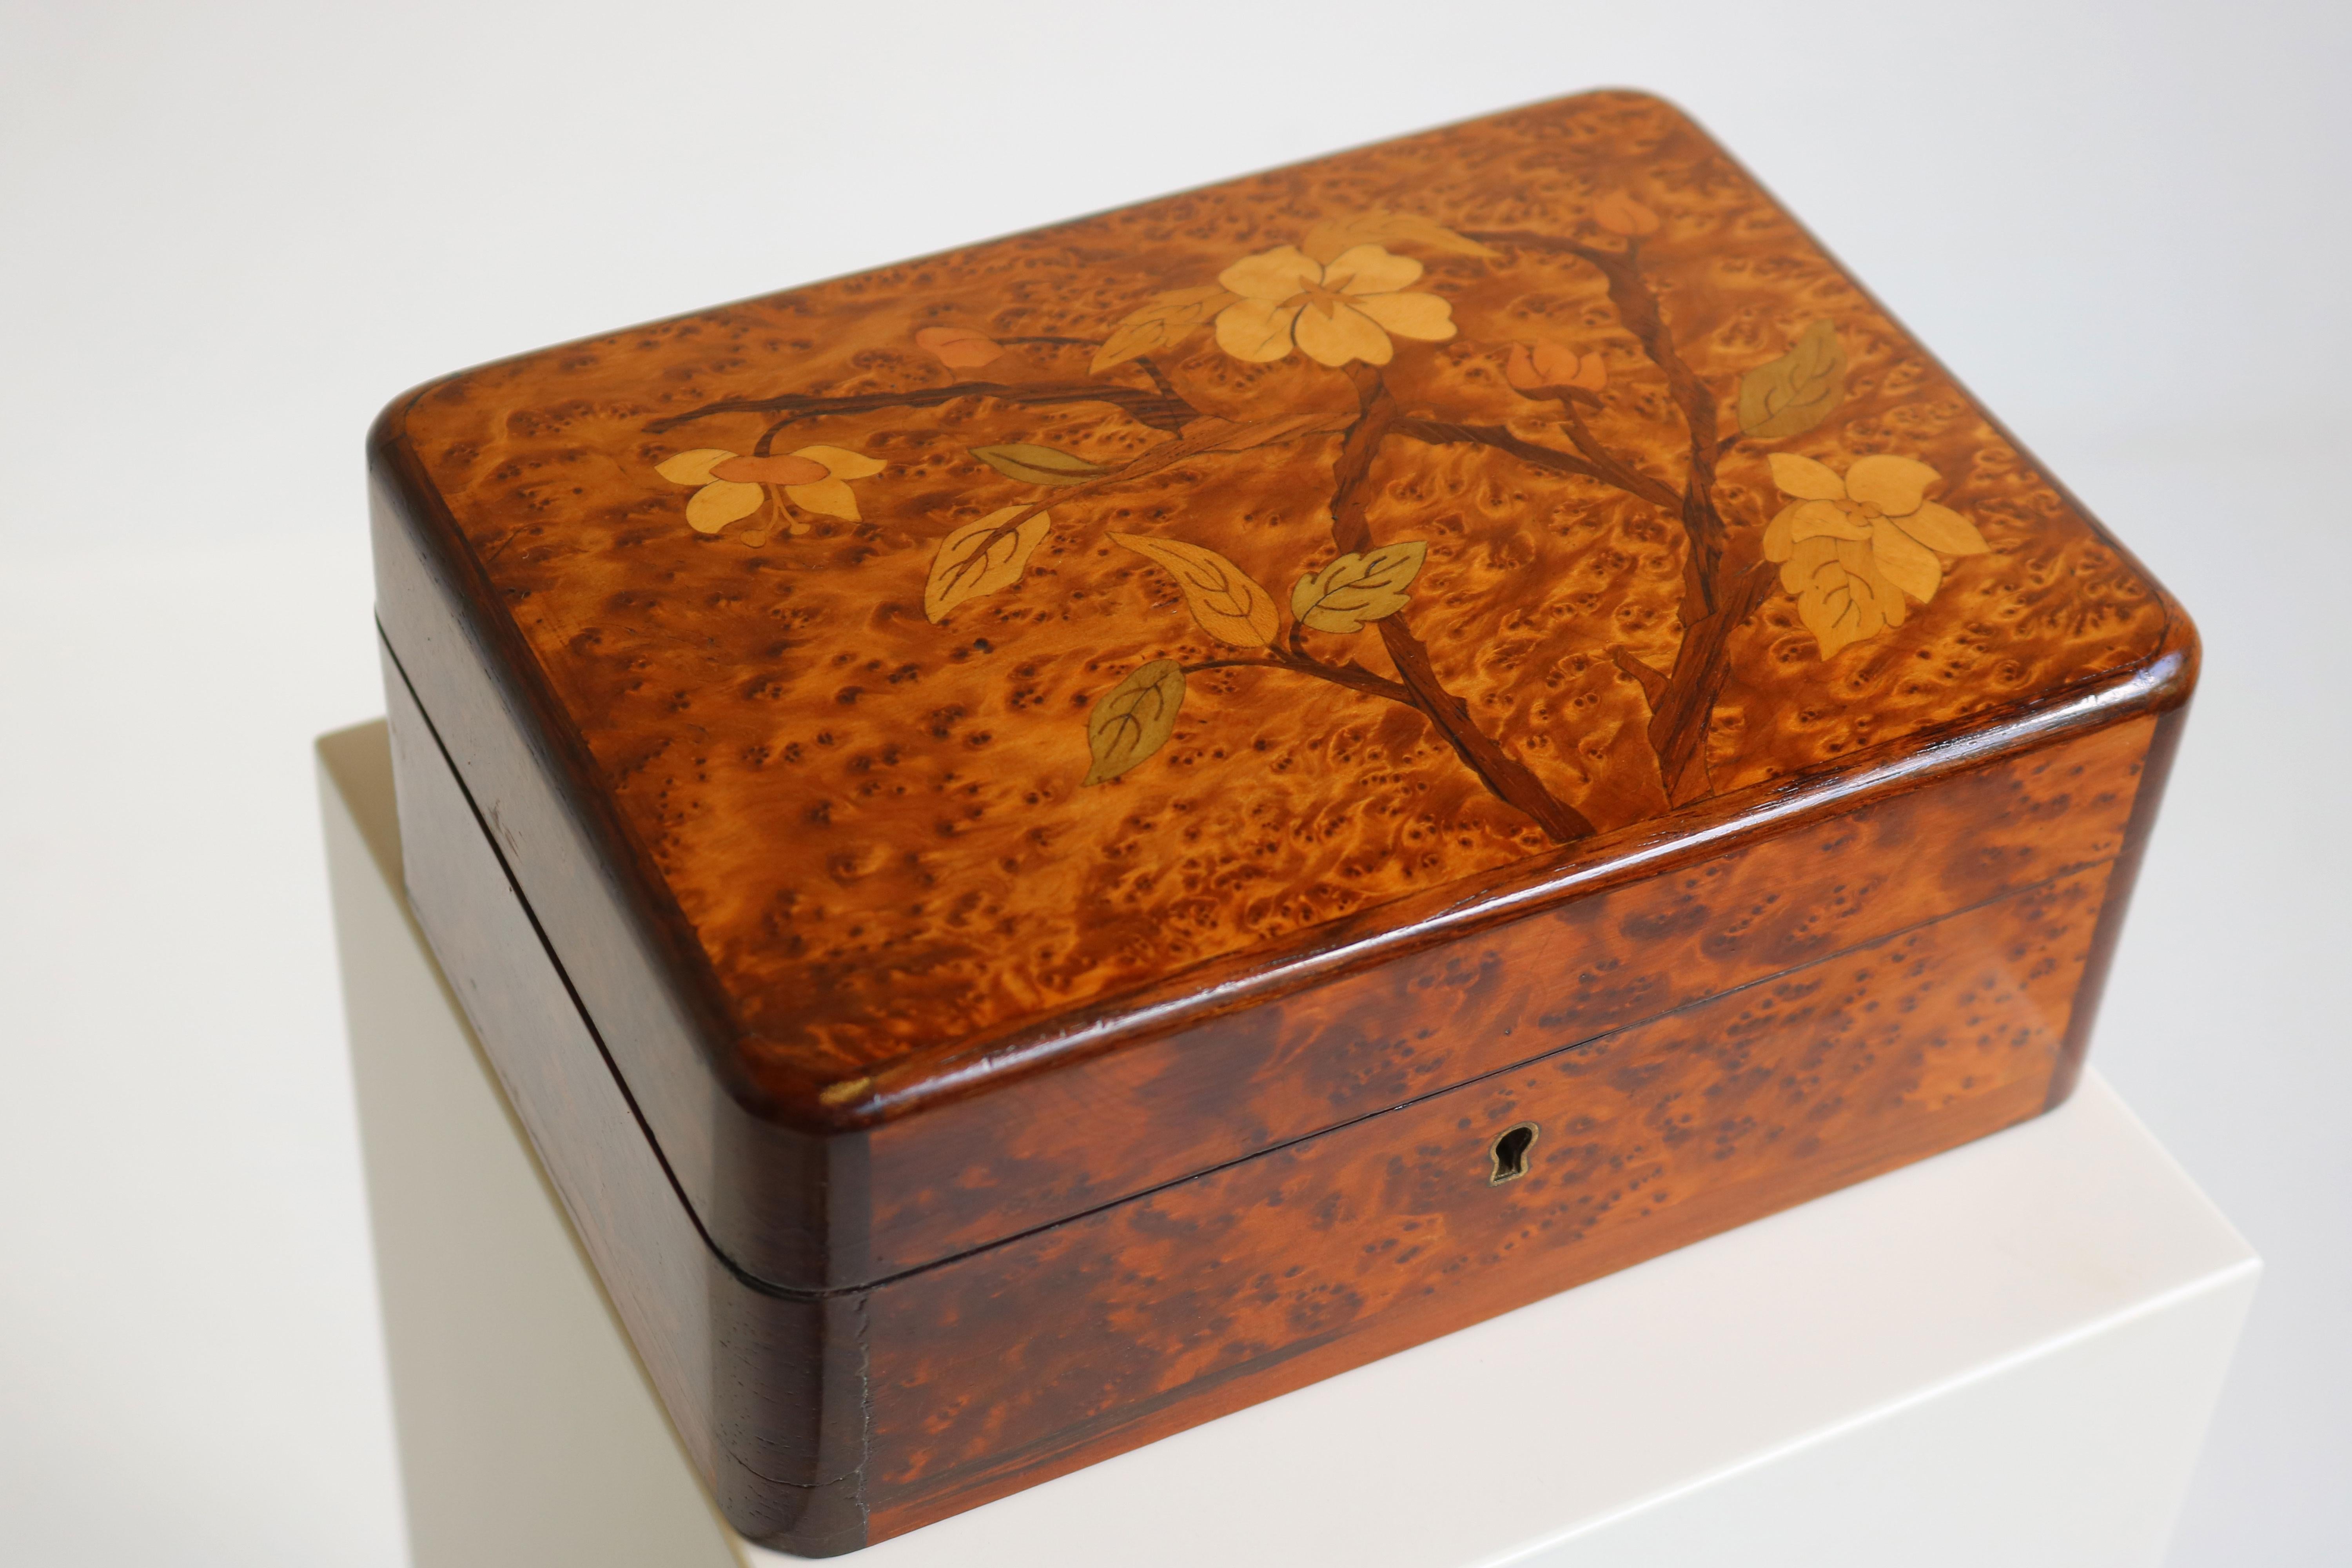 Gorgeous & rare! This French Art Nouveau Jewelry box made from Burl wood with floral inlay decorations. 
The jewelry box looks amazing from all angles, made with great care & craftsmanship. 
The original finish on the Burl wood is amazing and the